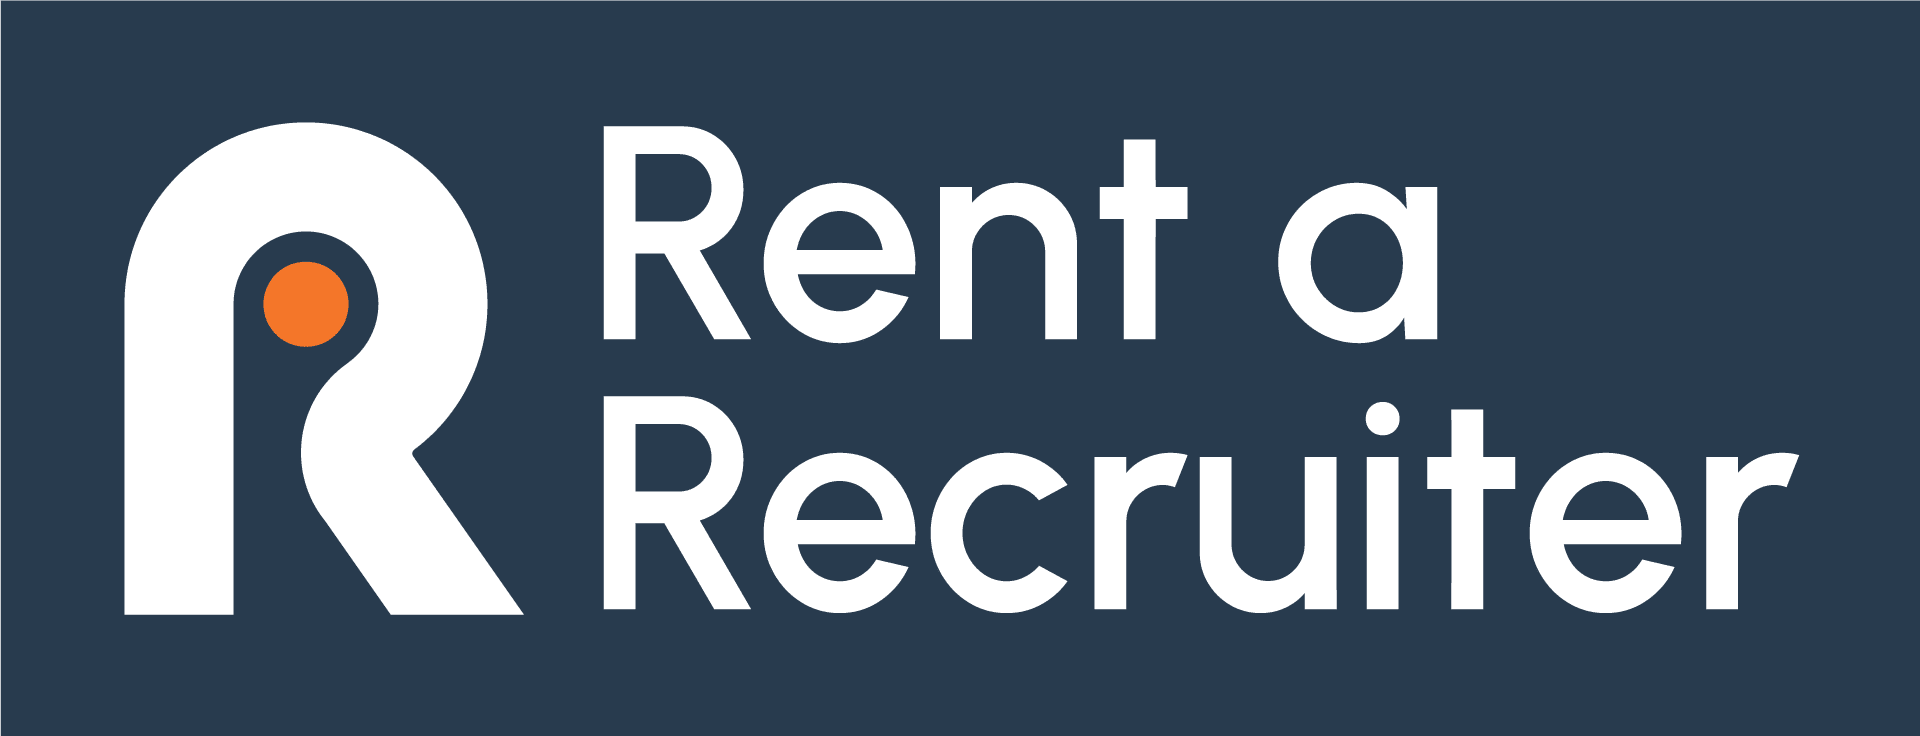 Yala Rebrands to Rent a Recruiter to Aid their Future Growth & Success